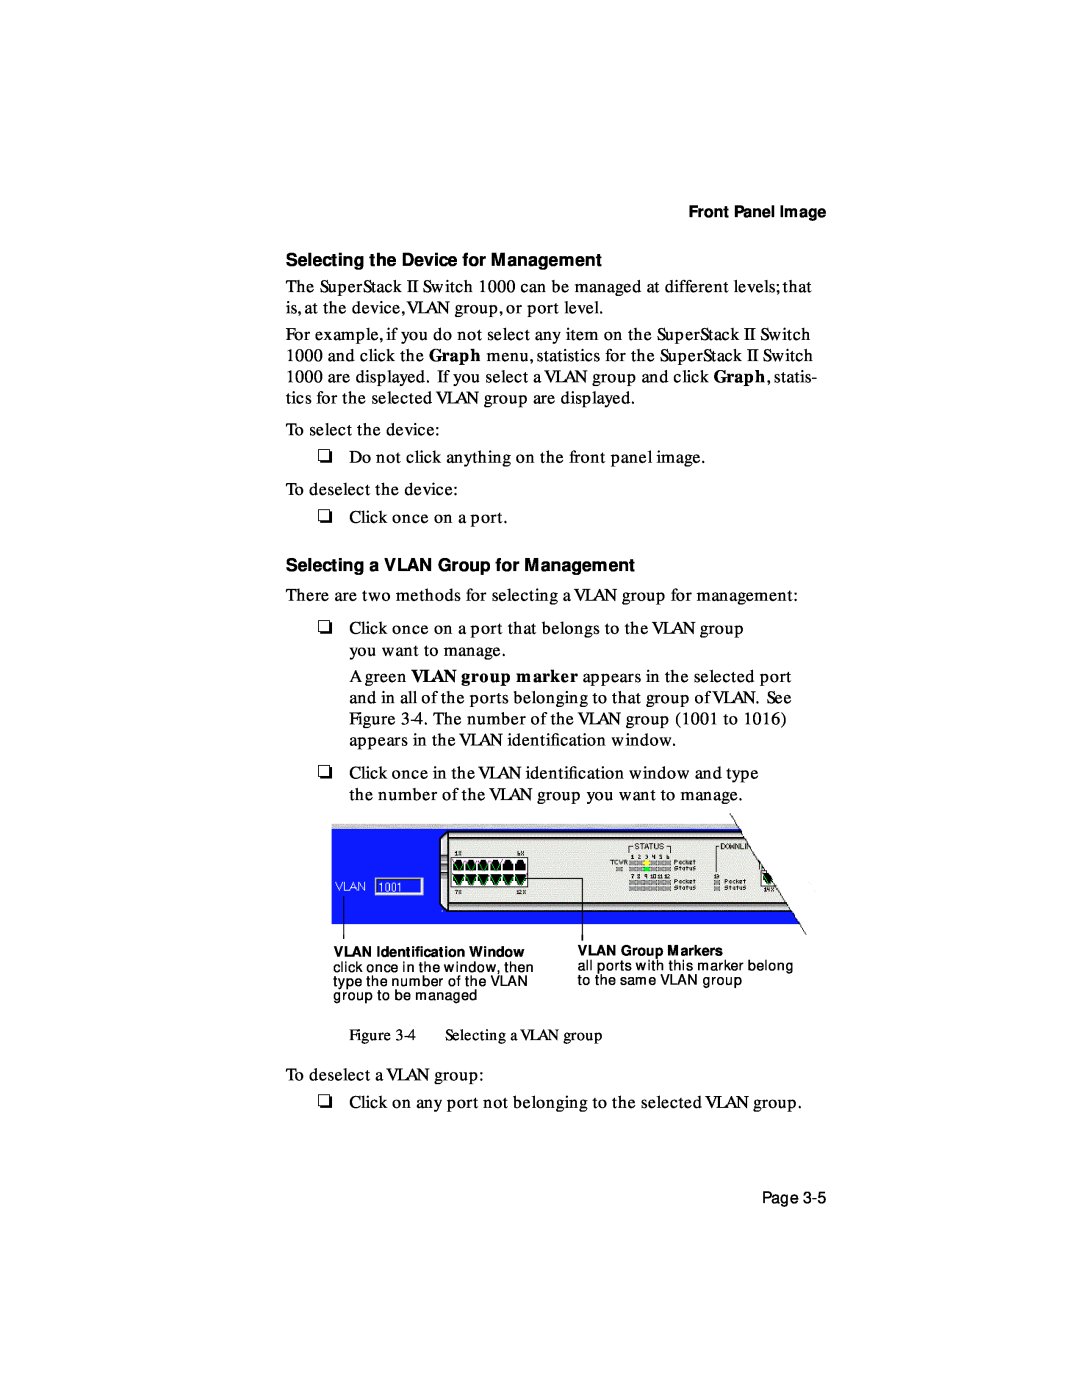 Asante Technologies 1000 user manual Selecting the Device for Management, Selecting a VLAN Group for Management 